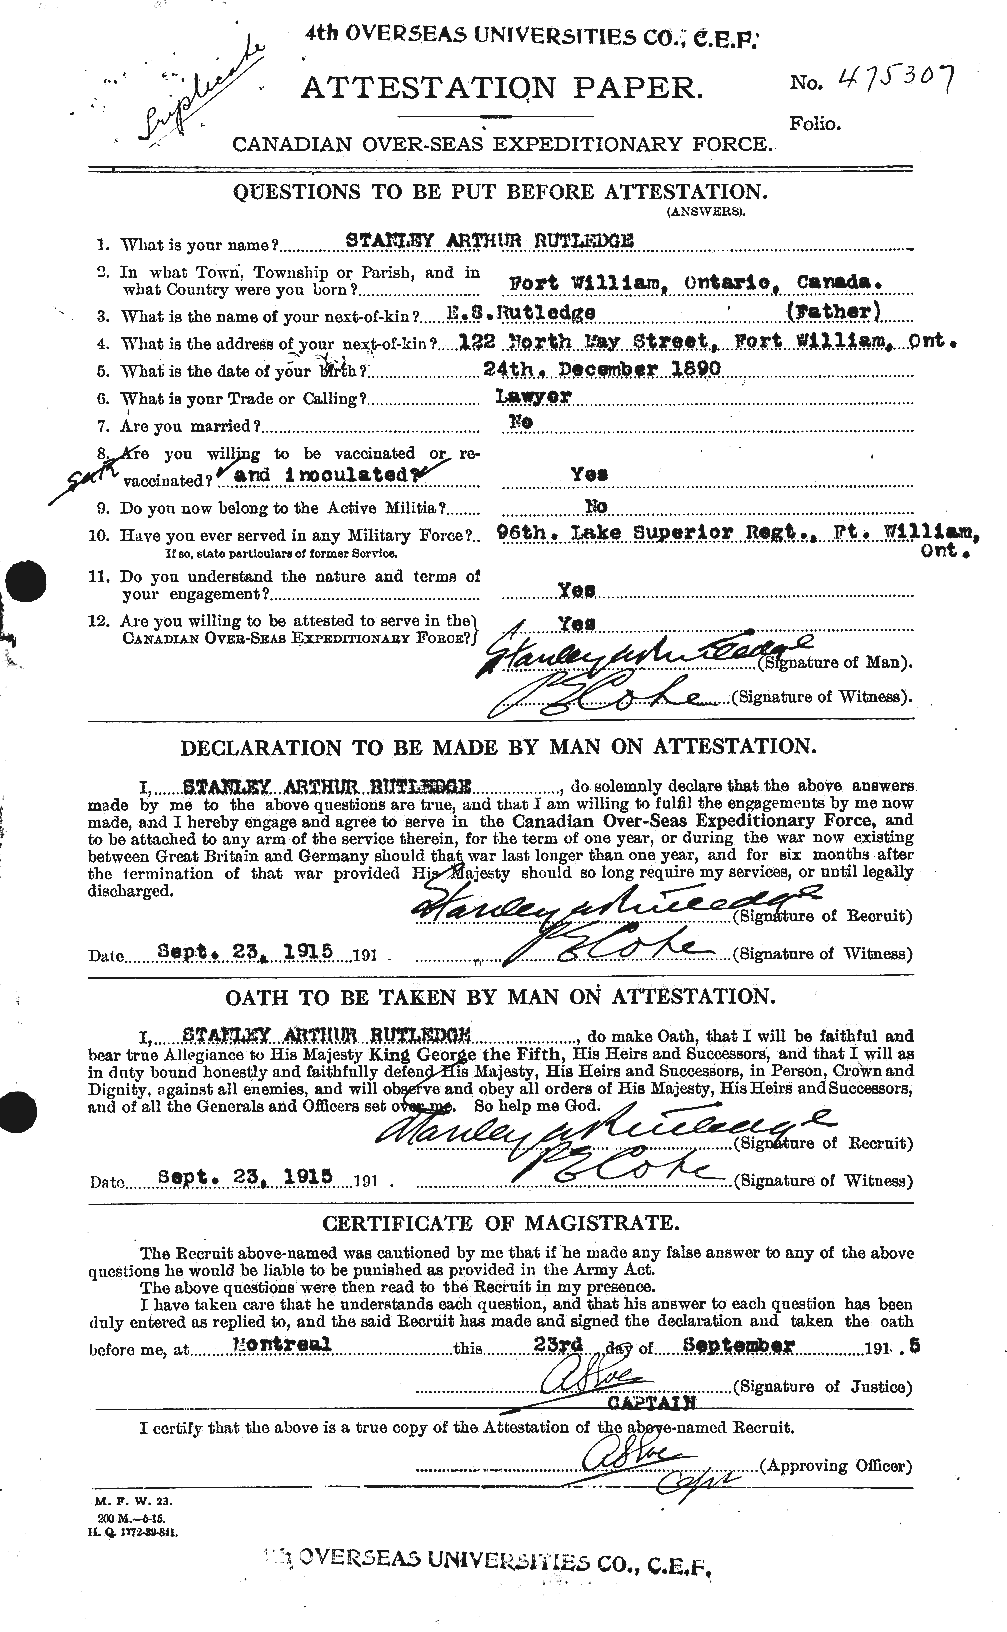 Personnel Records of the First World War - CEF 620813a